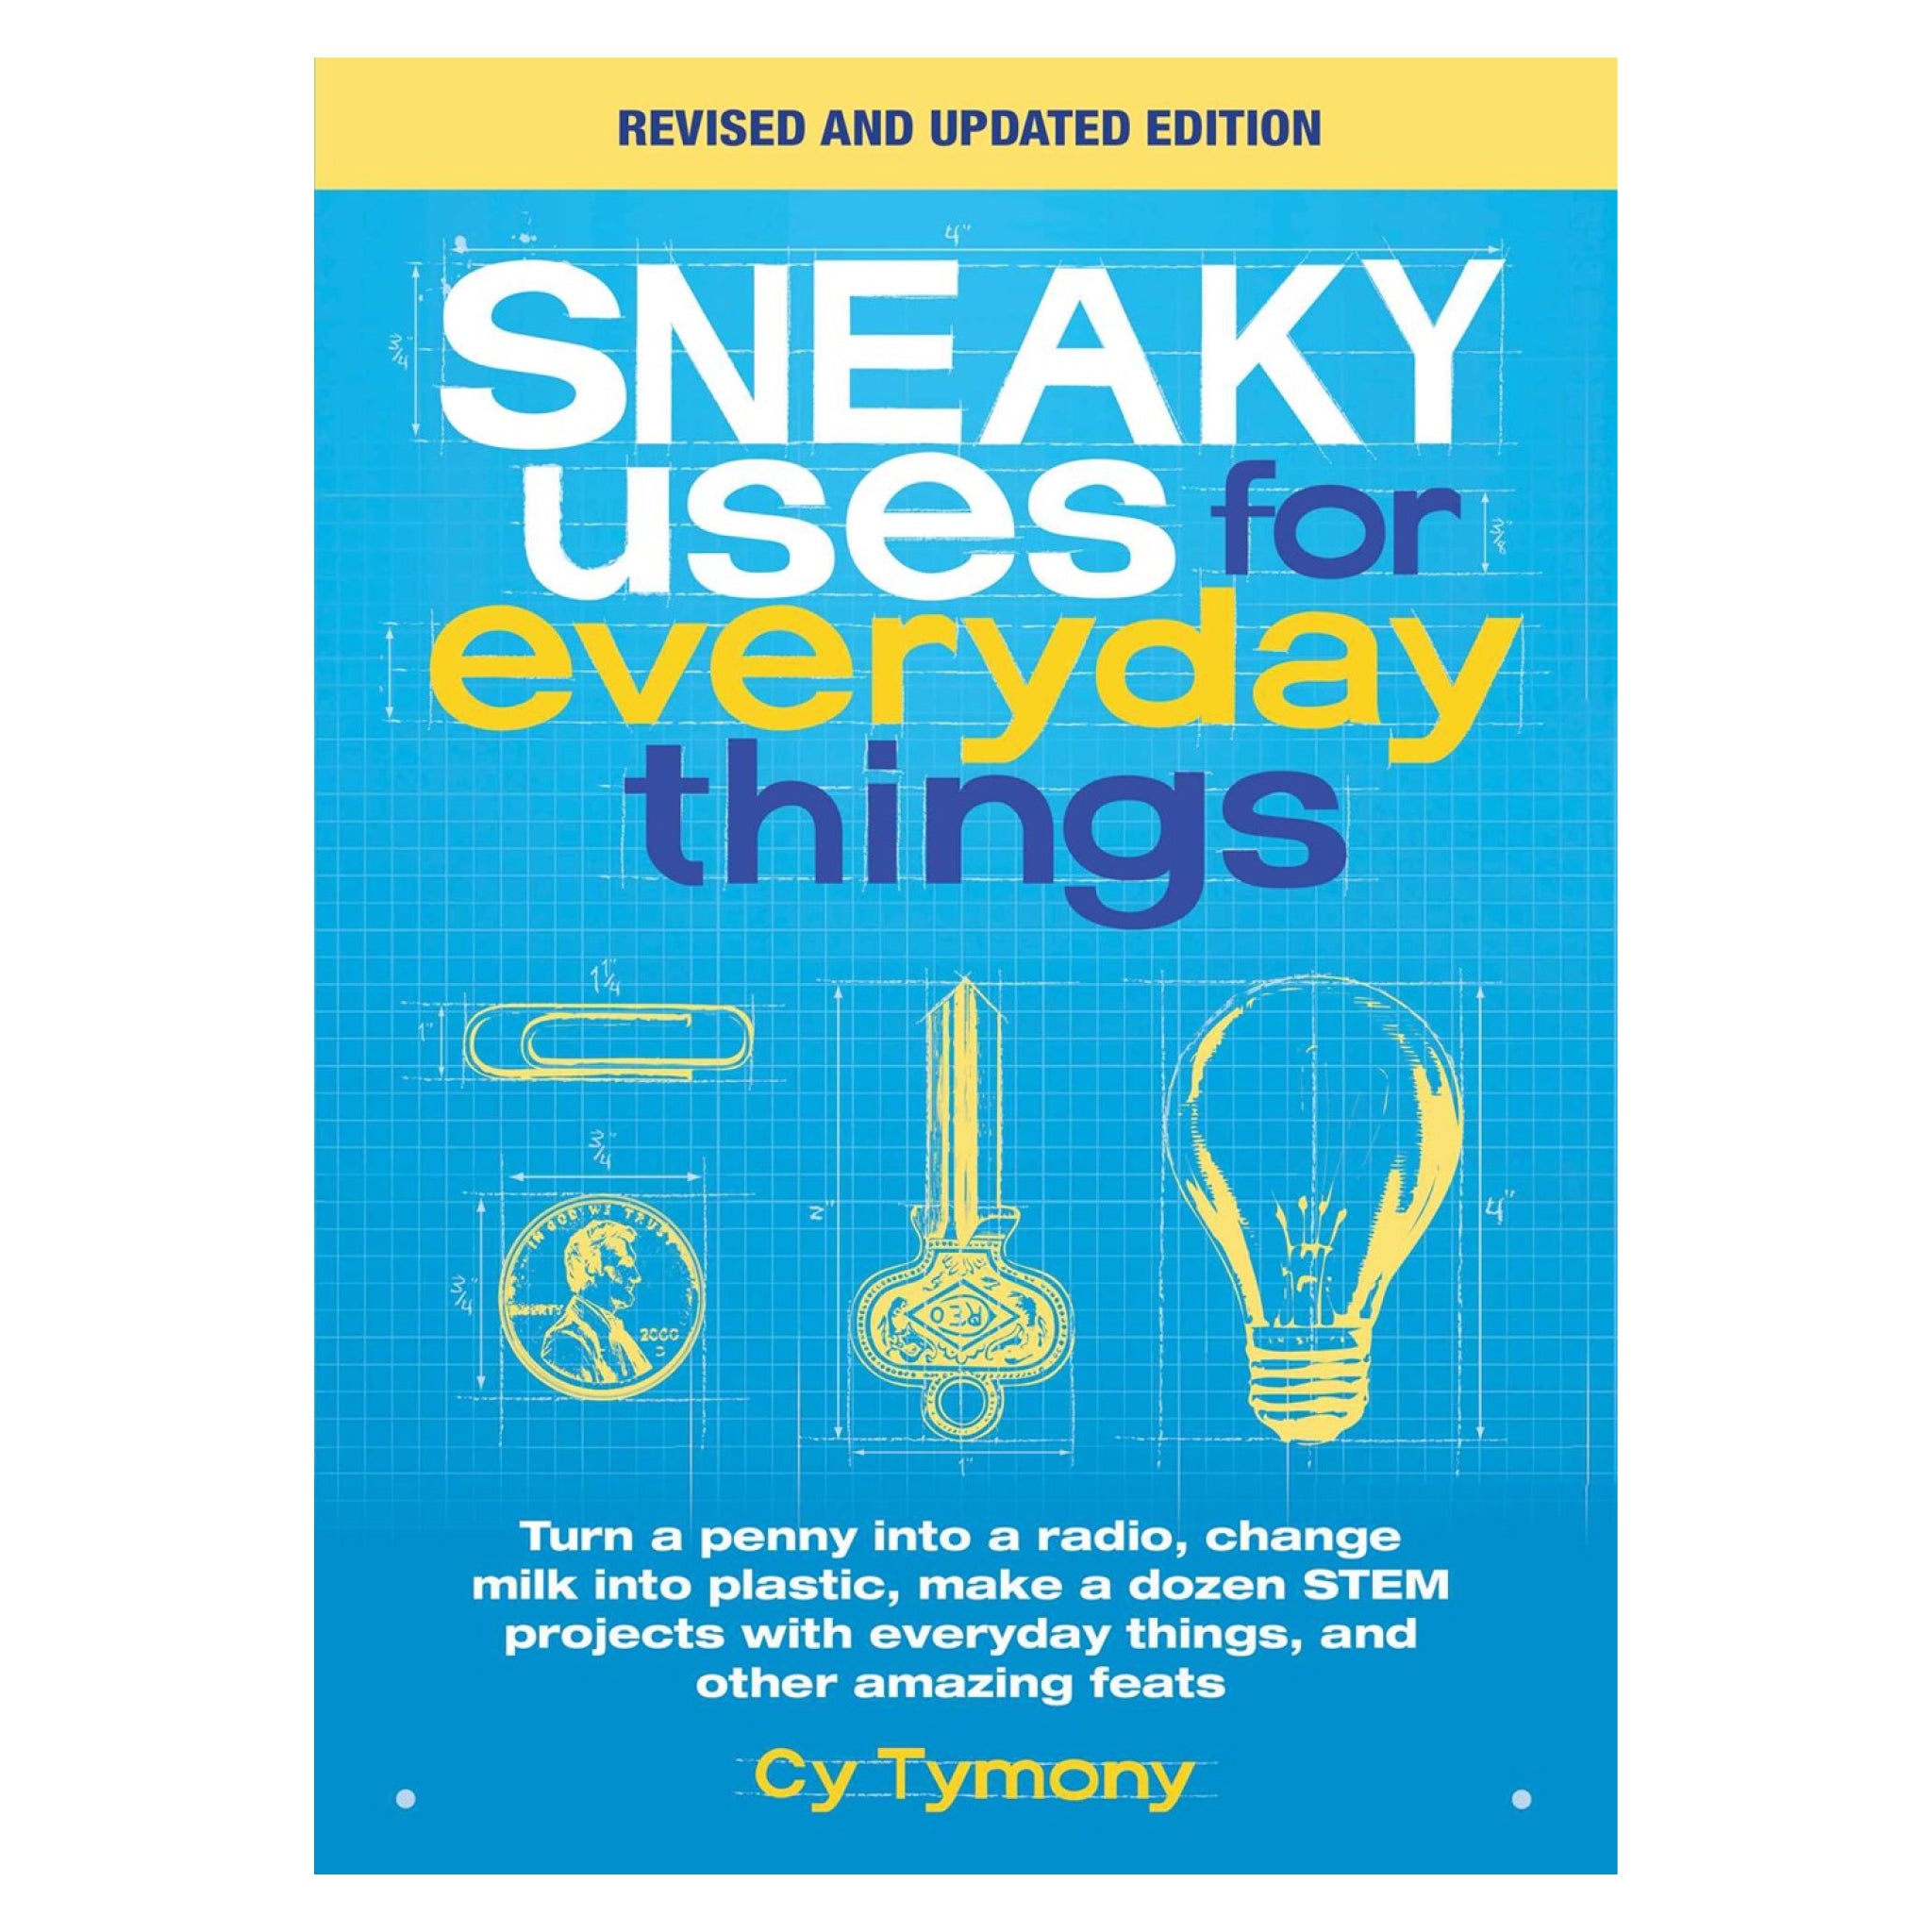 Sneaky　Everyday　Revised　Uses　SPYSCAPE　Edition　for　Things,　–